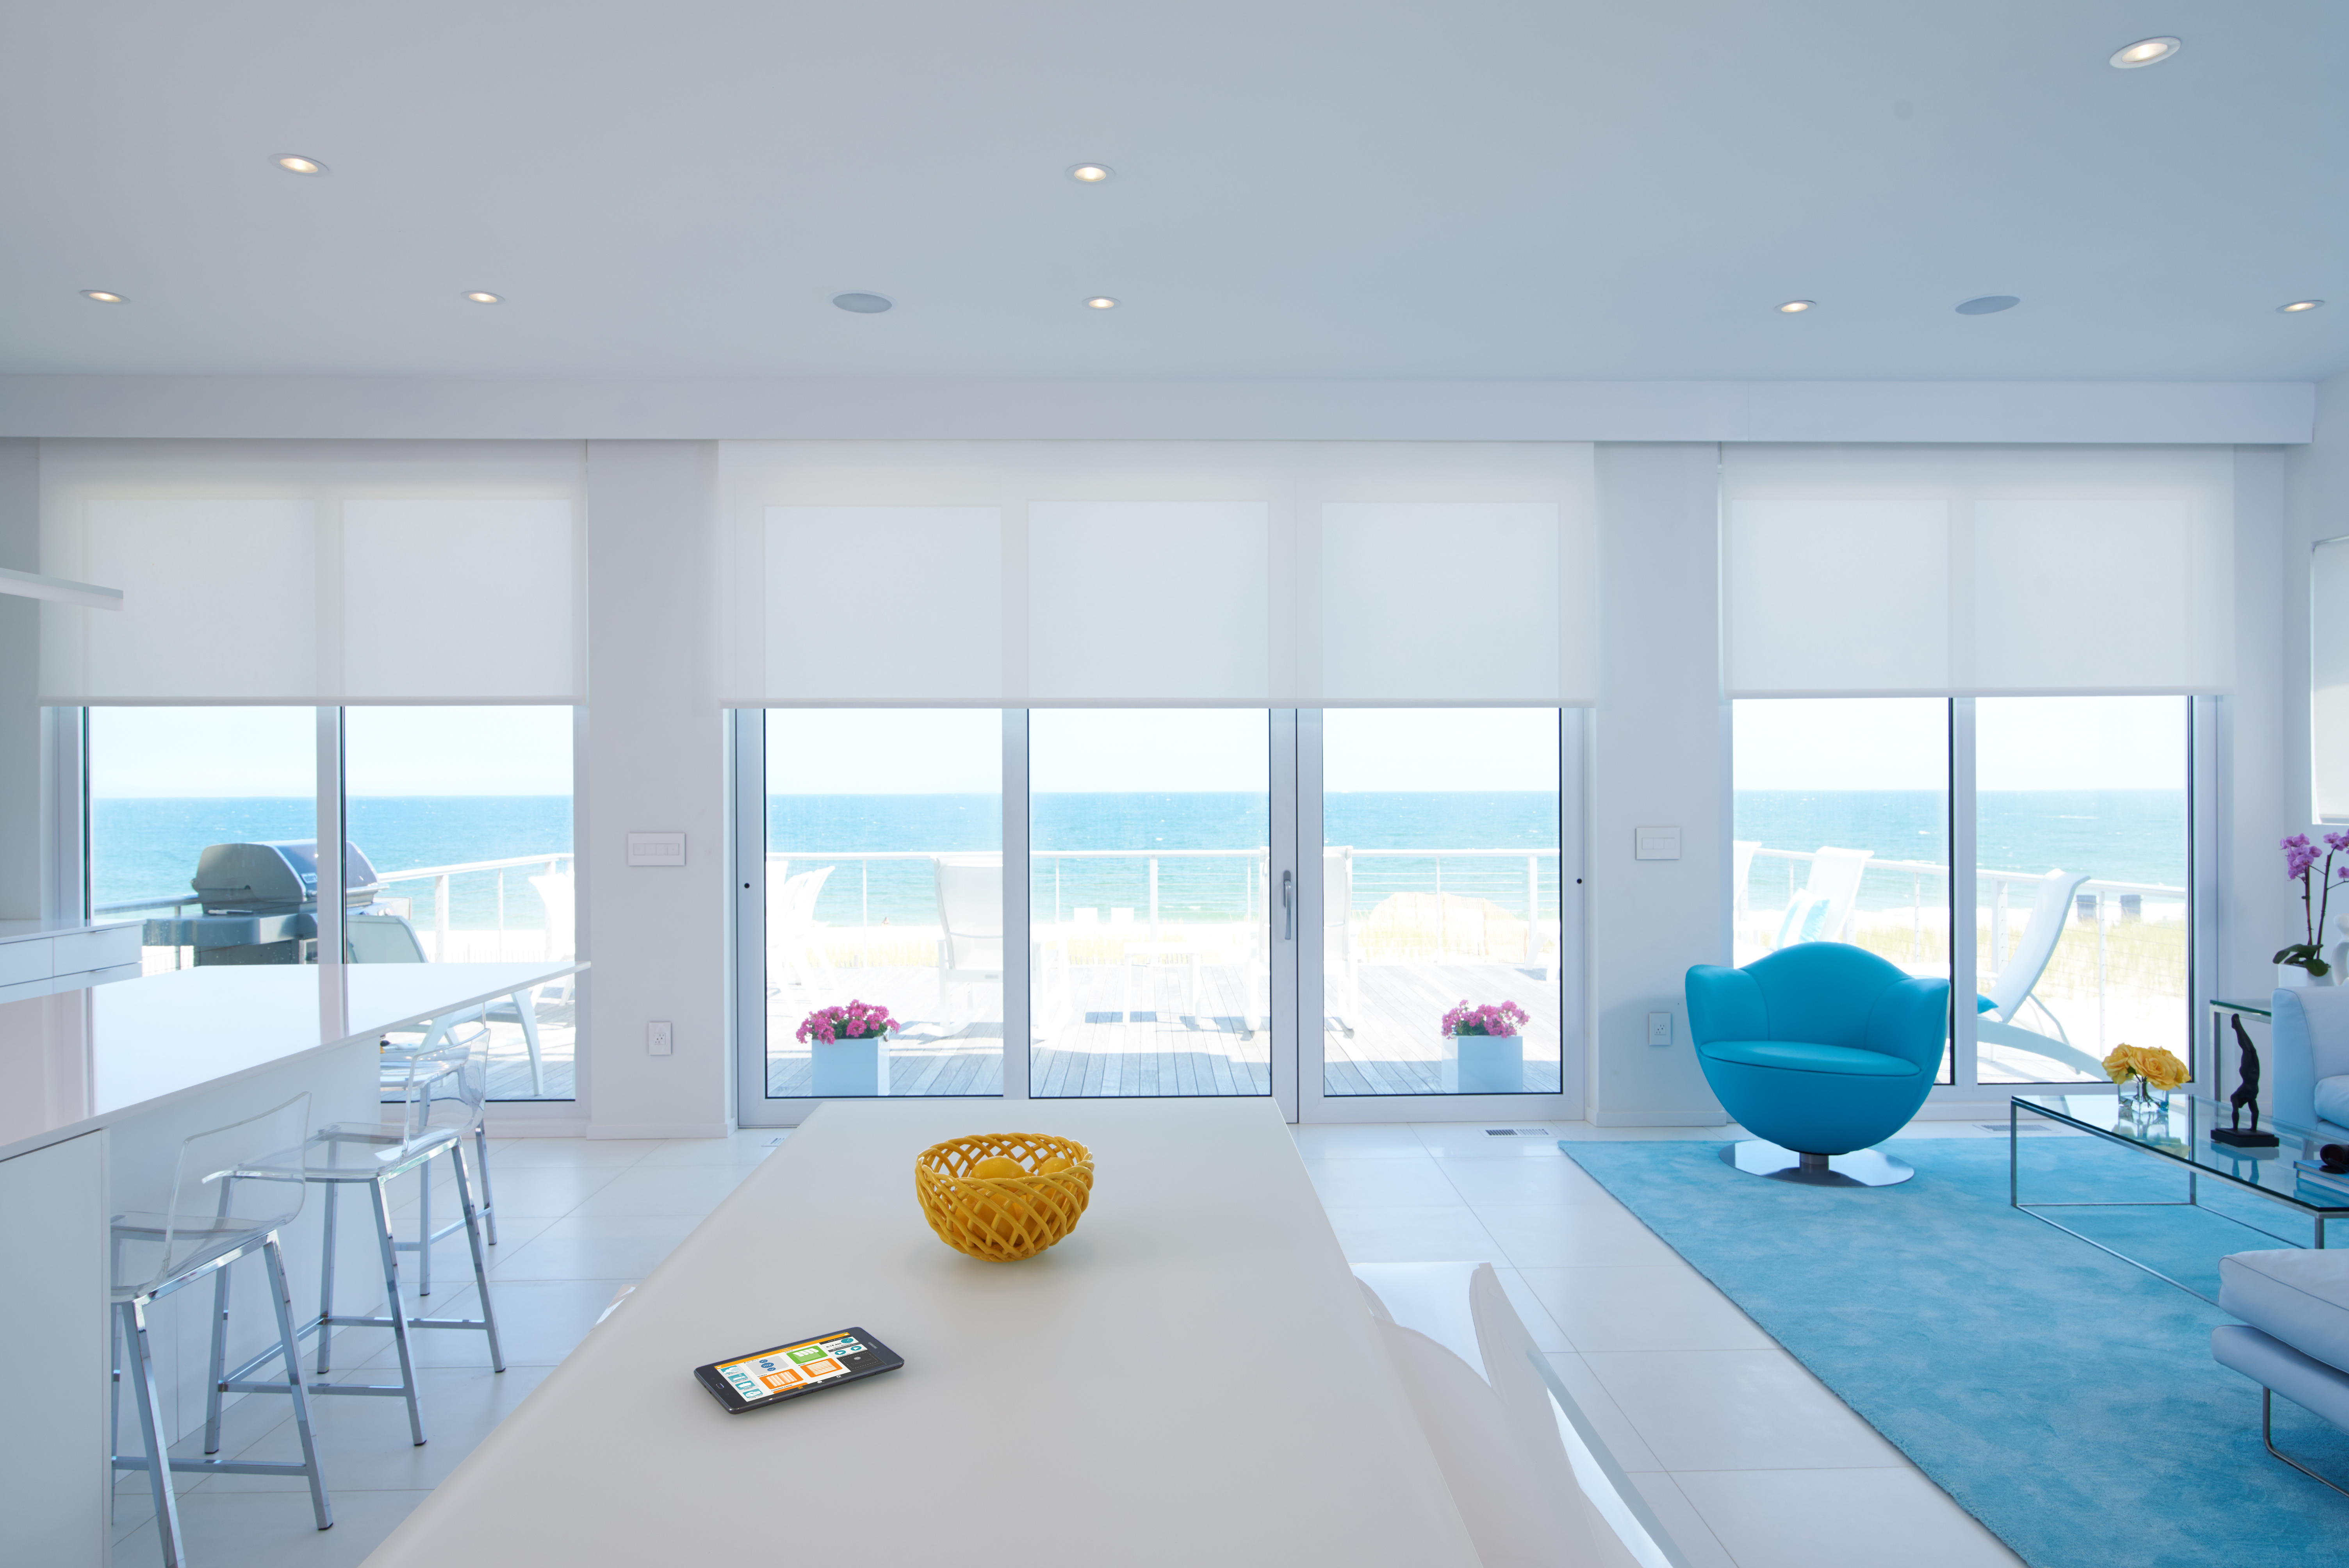 Easy and breezy! Motorized roller shades make life easier at the touch of button! Schedule home automation, or make a change on a whim. The choice is yours with Budget Blinds of Newport home automation options! Automated roller shades